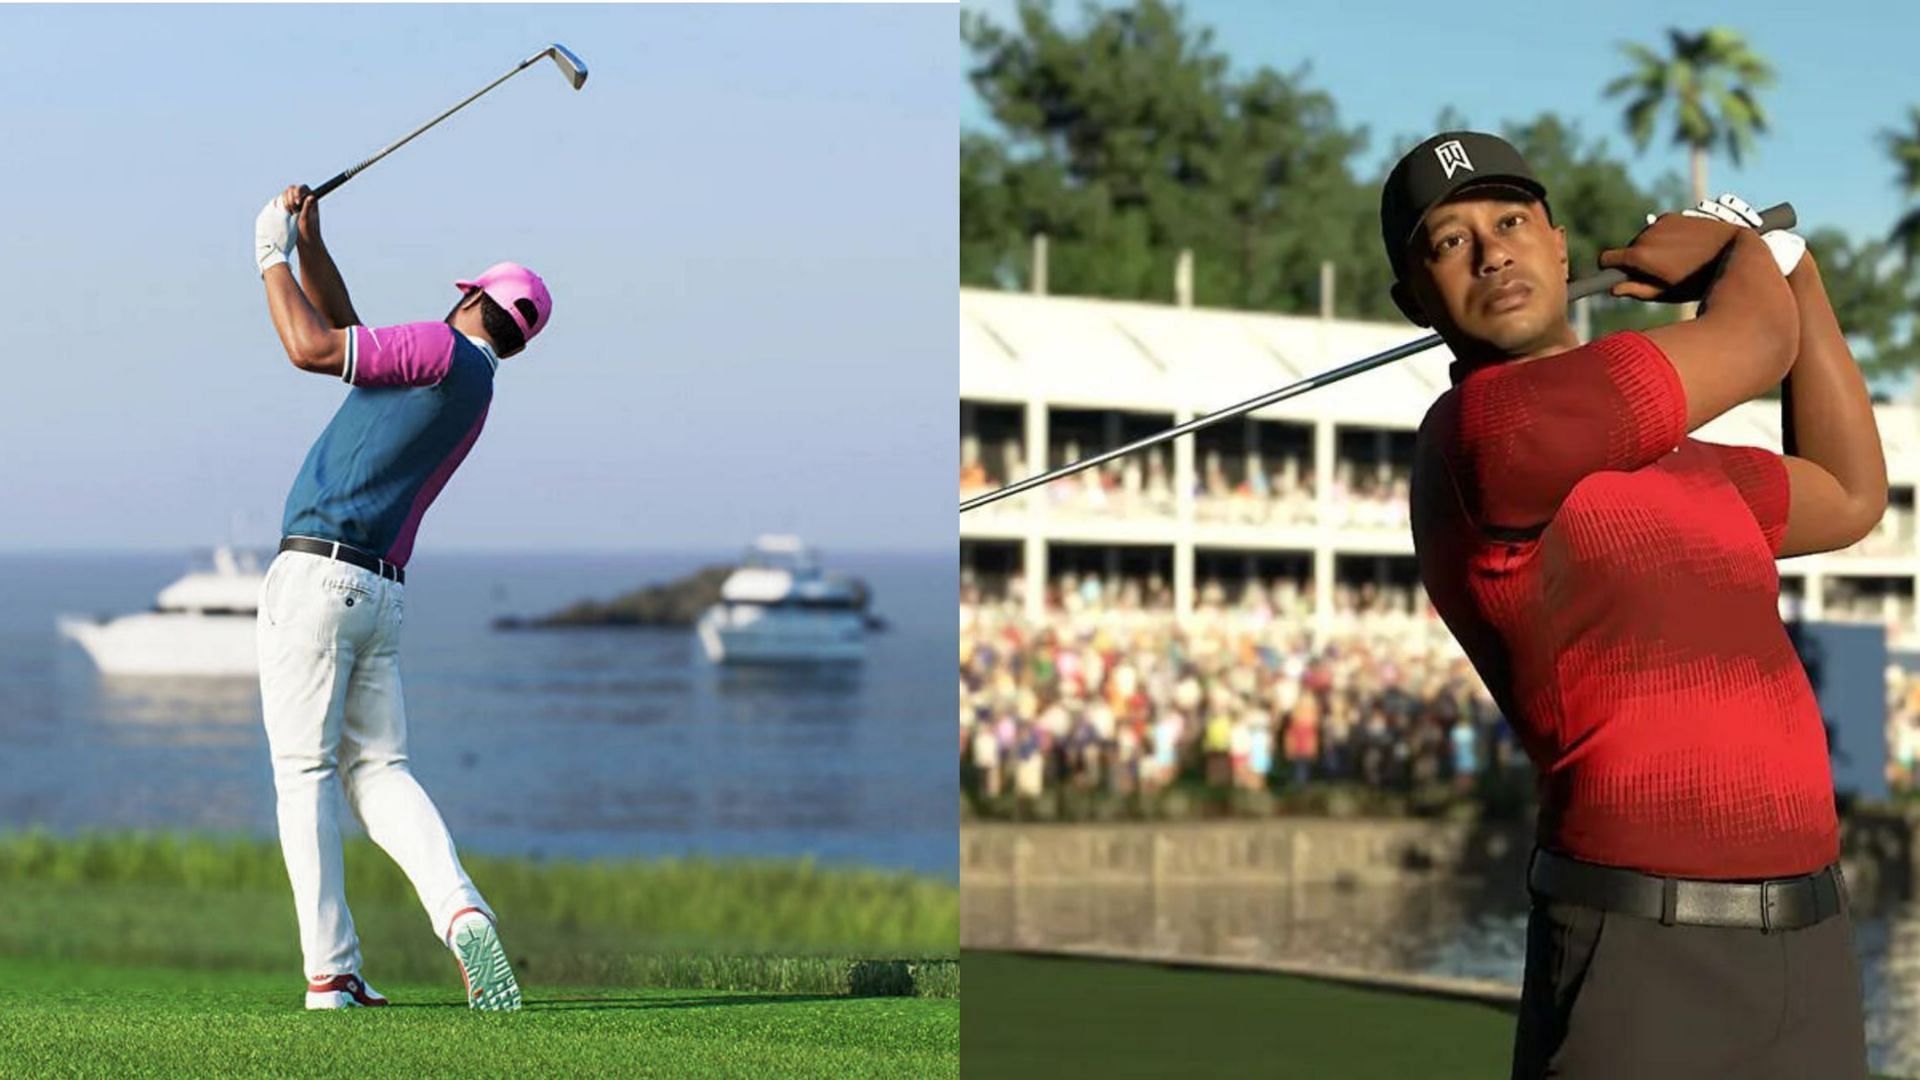 Licensing will likely keep Tiger Woods away from the upcoming game (Images via EA Sports, 2K)